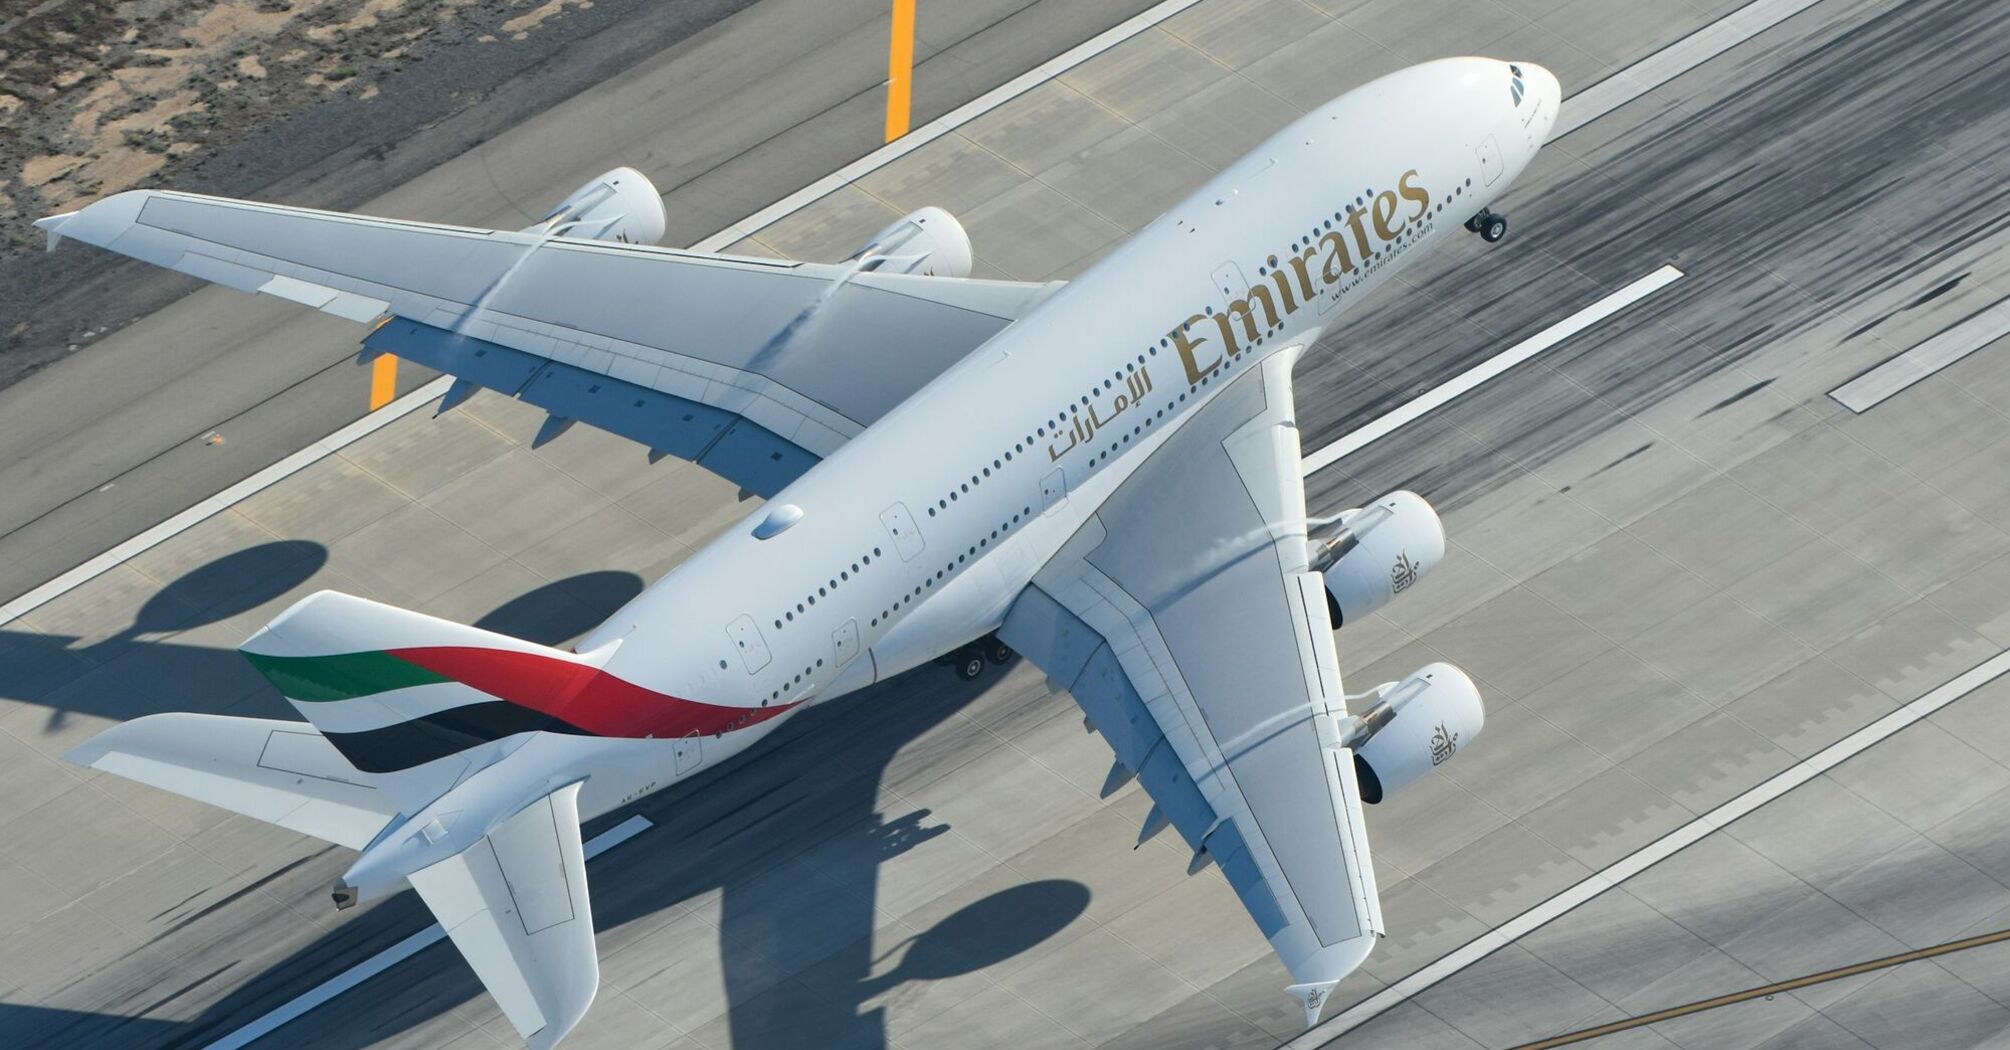 Emirates plane taking off from runway